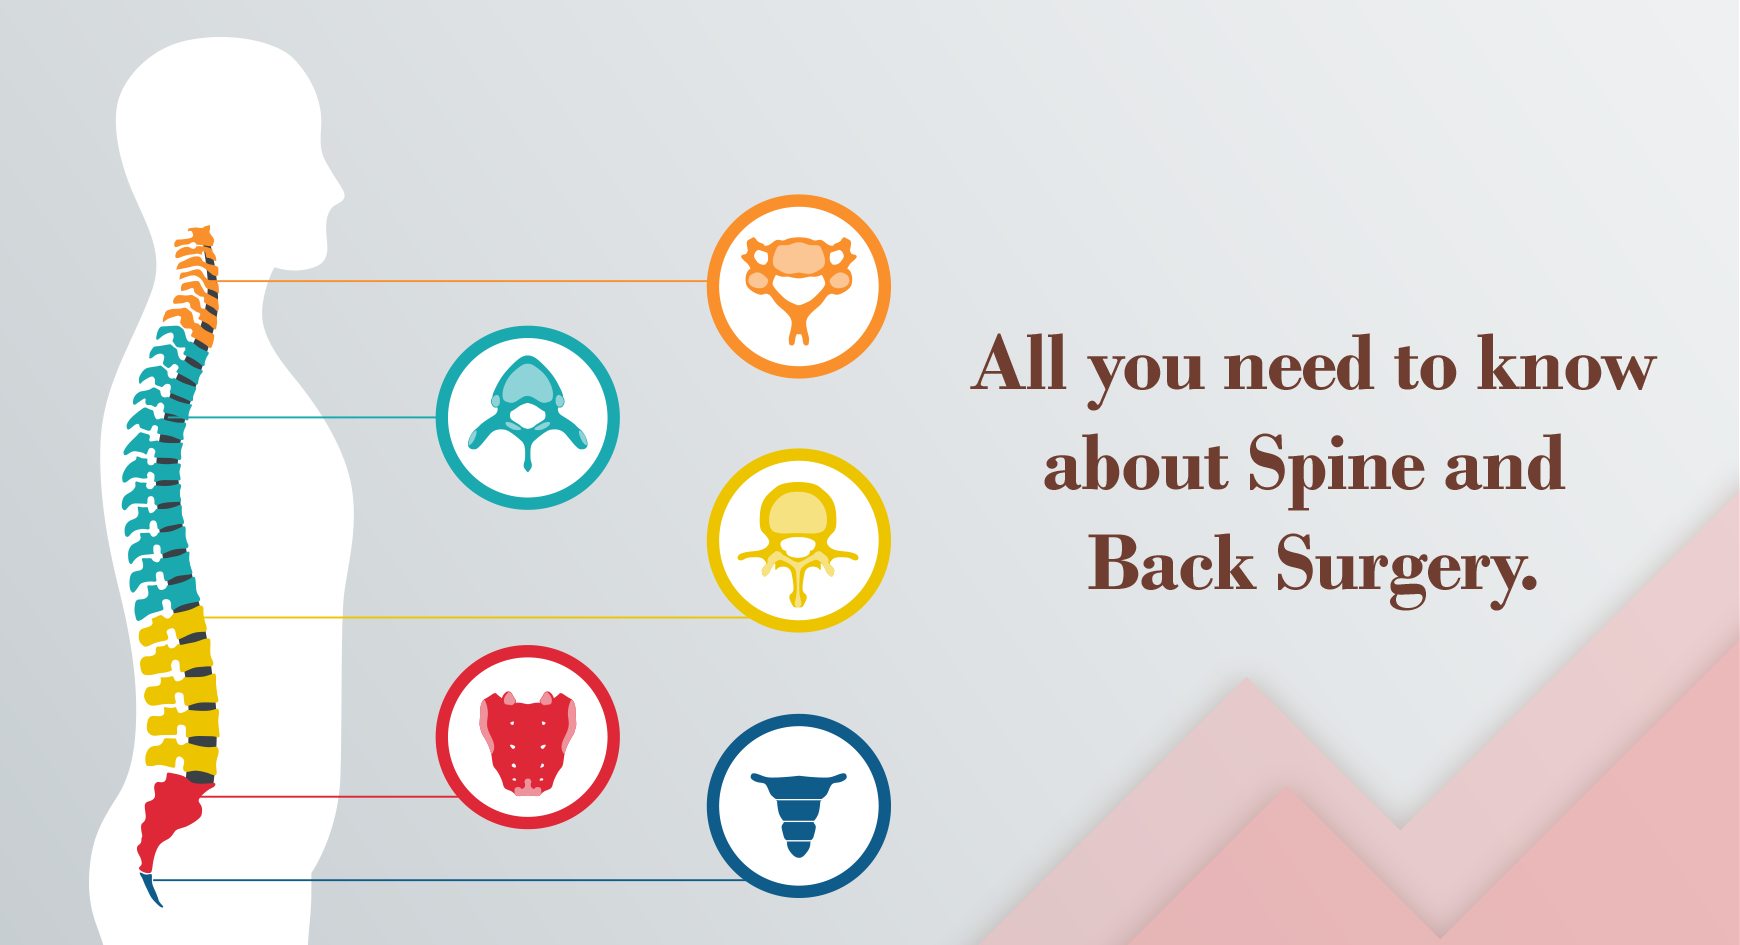 All you need to know about spine and back surgery